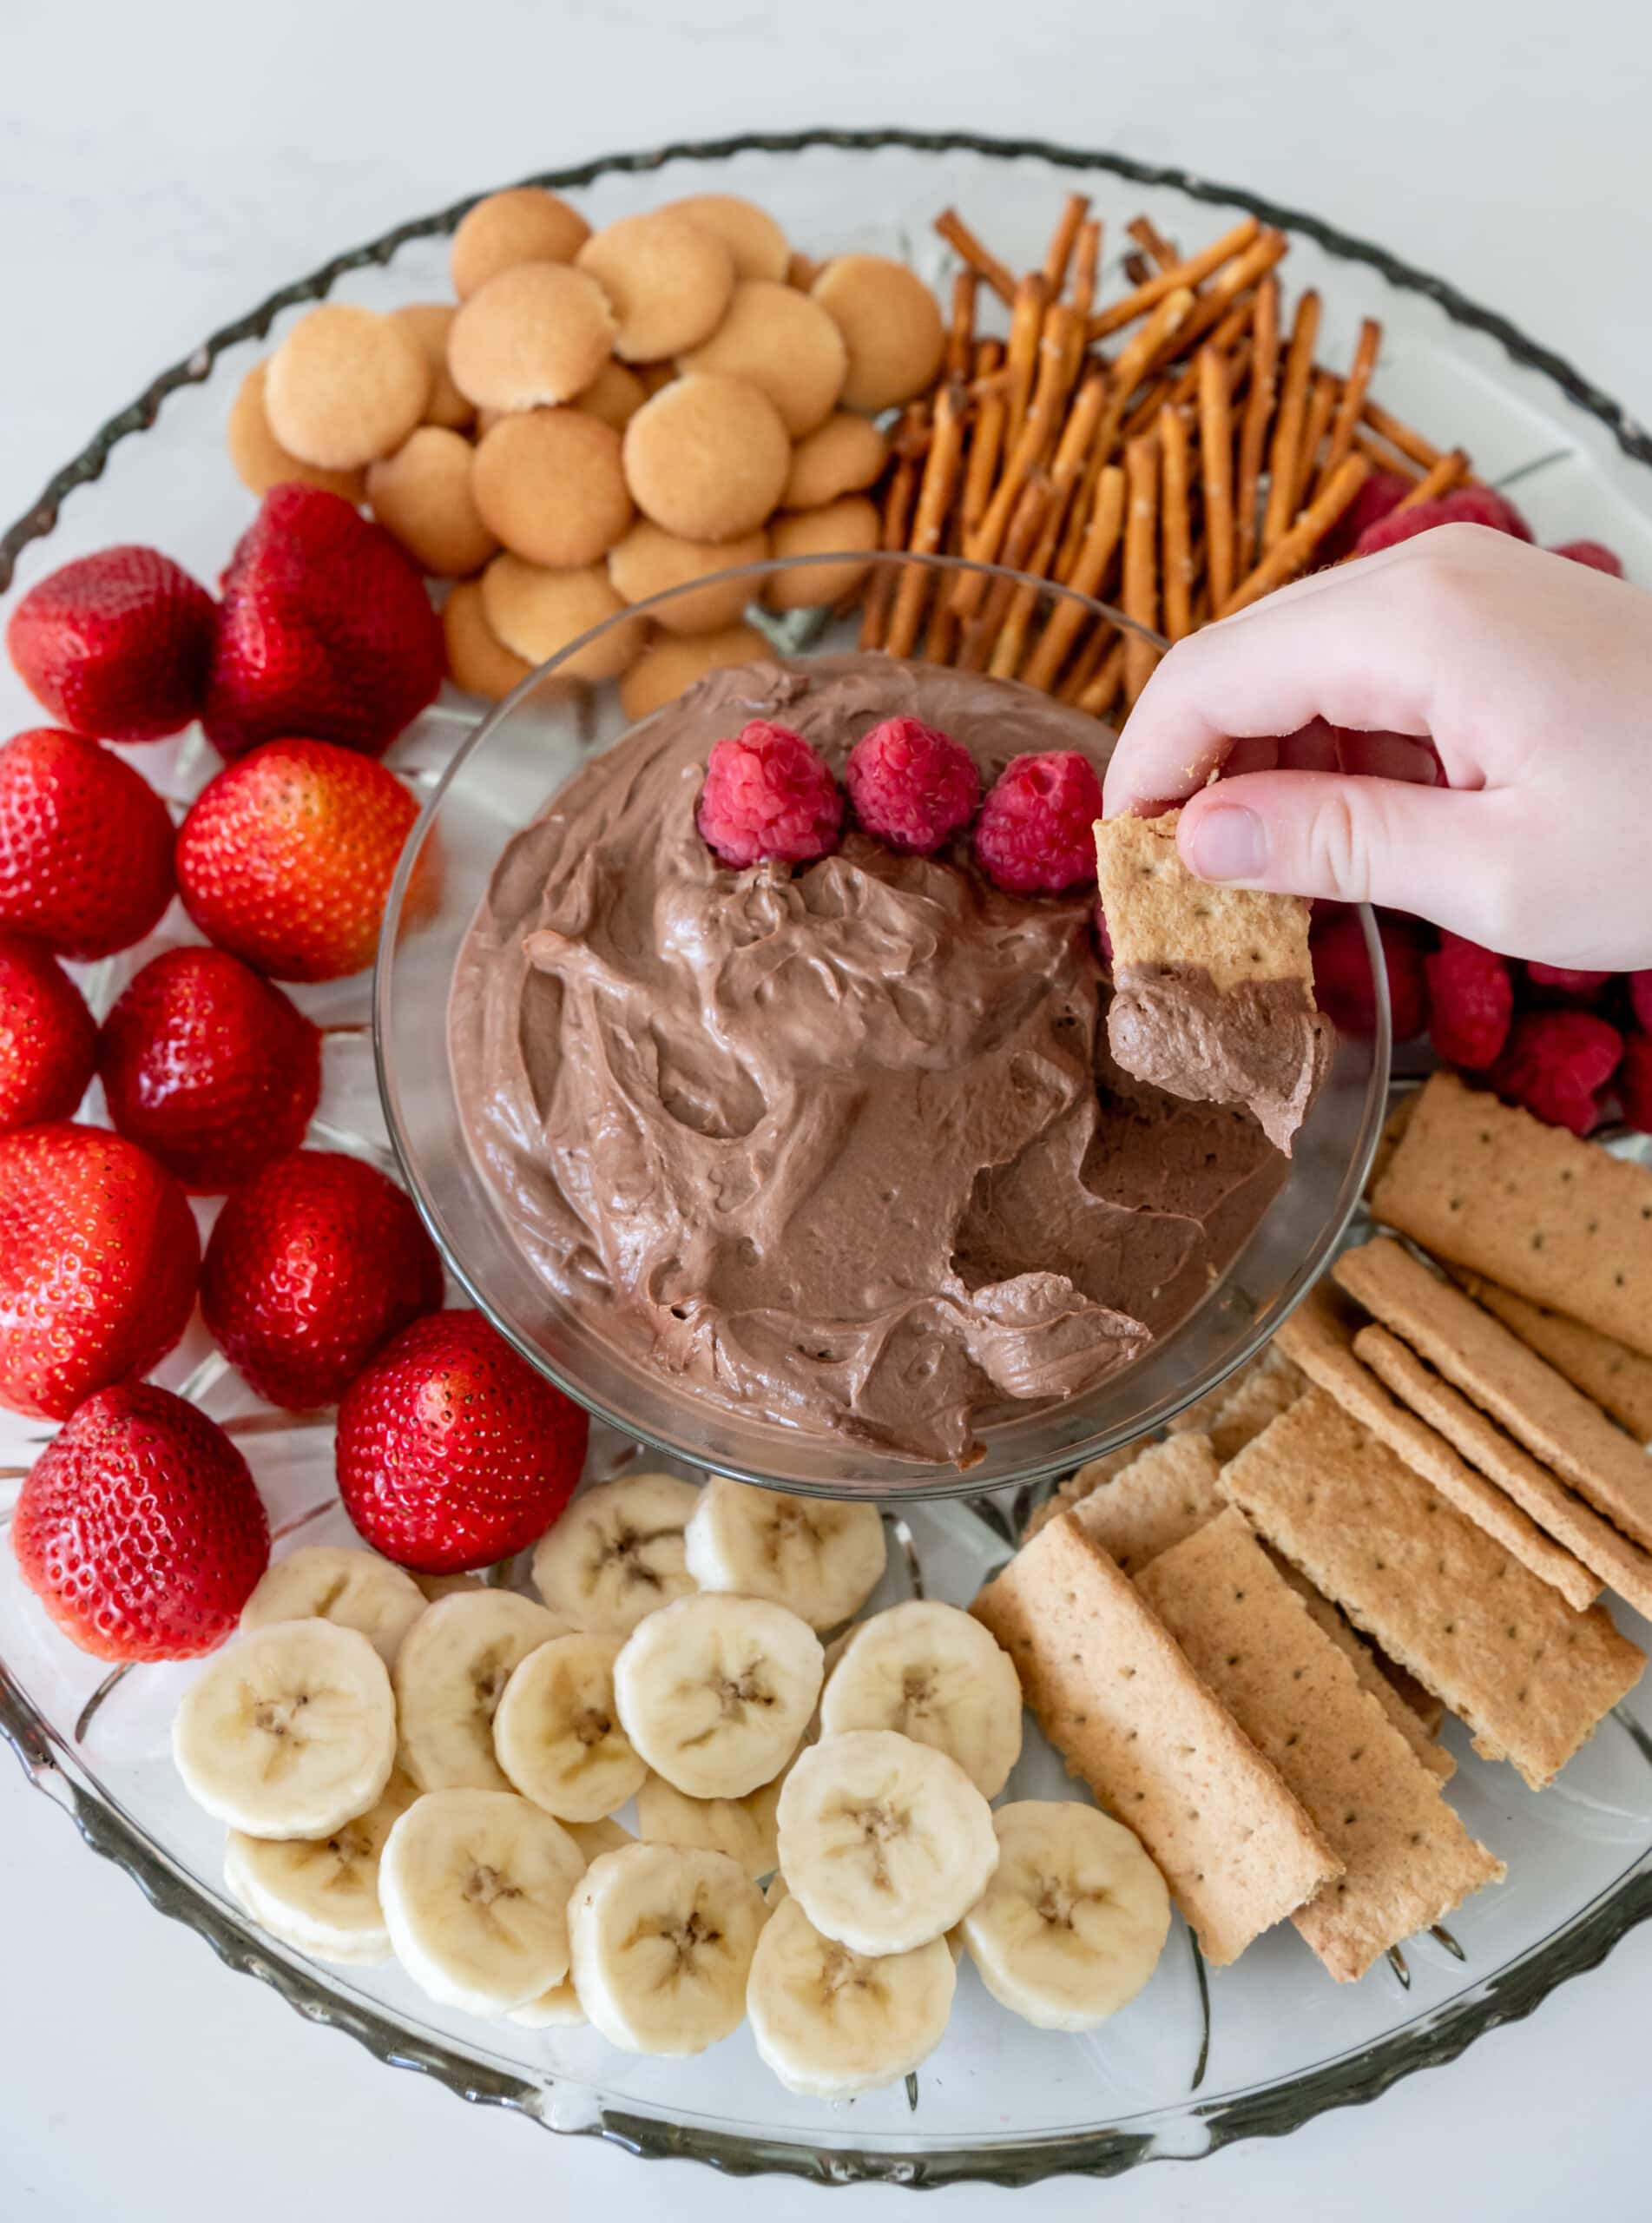 Little hand dipping a graham cracker into the chocolate peanut butter dip.